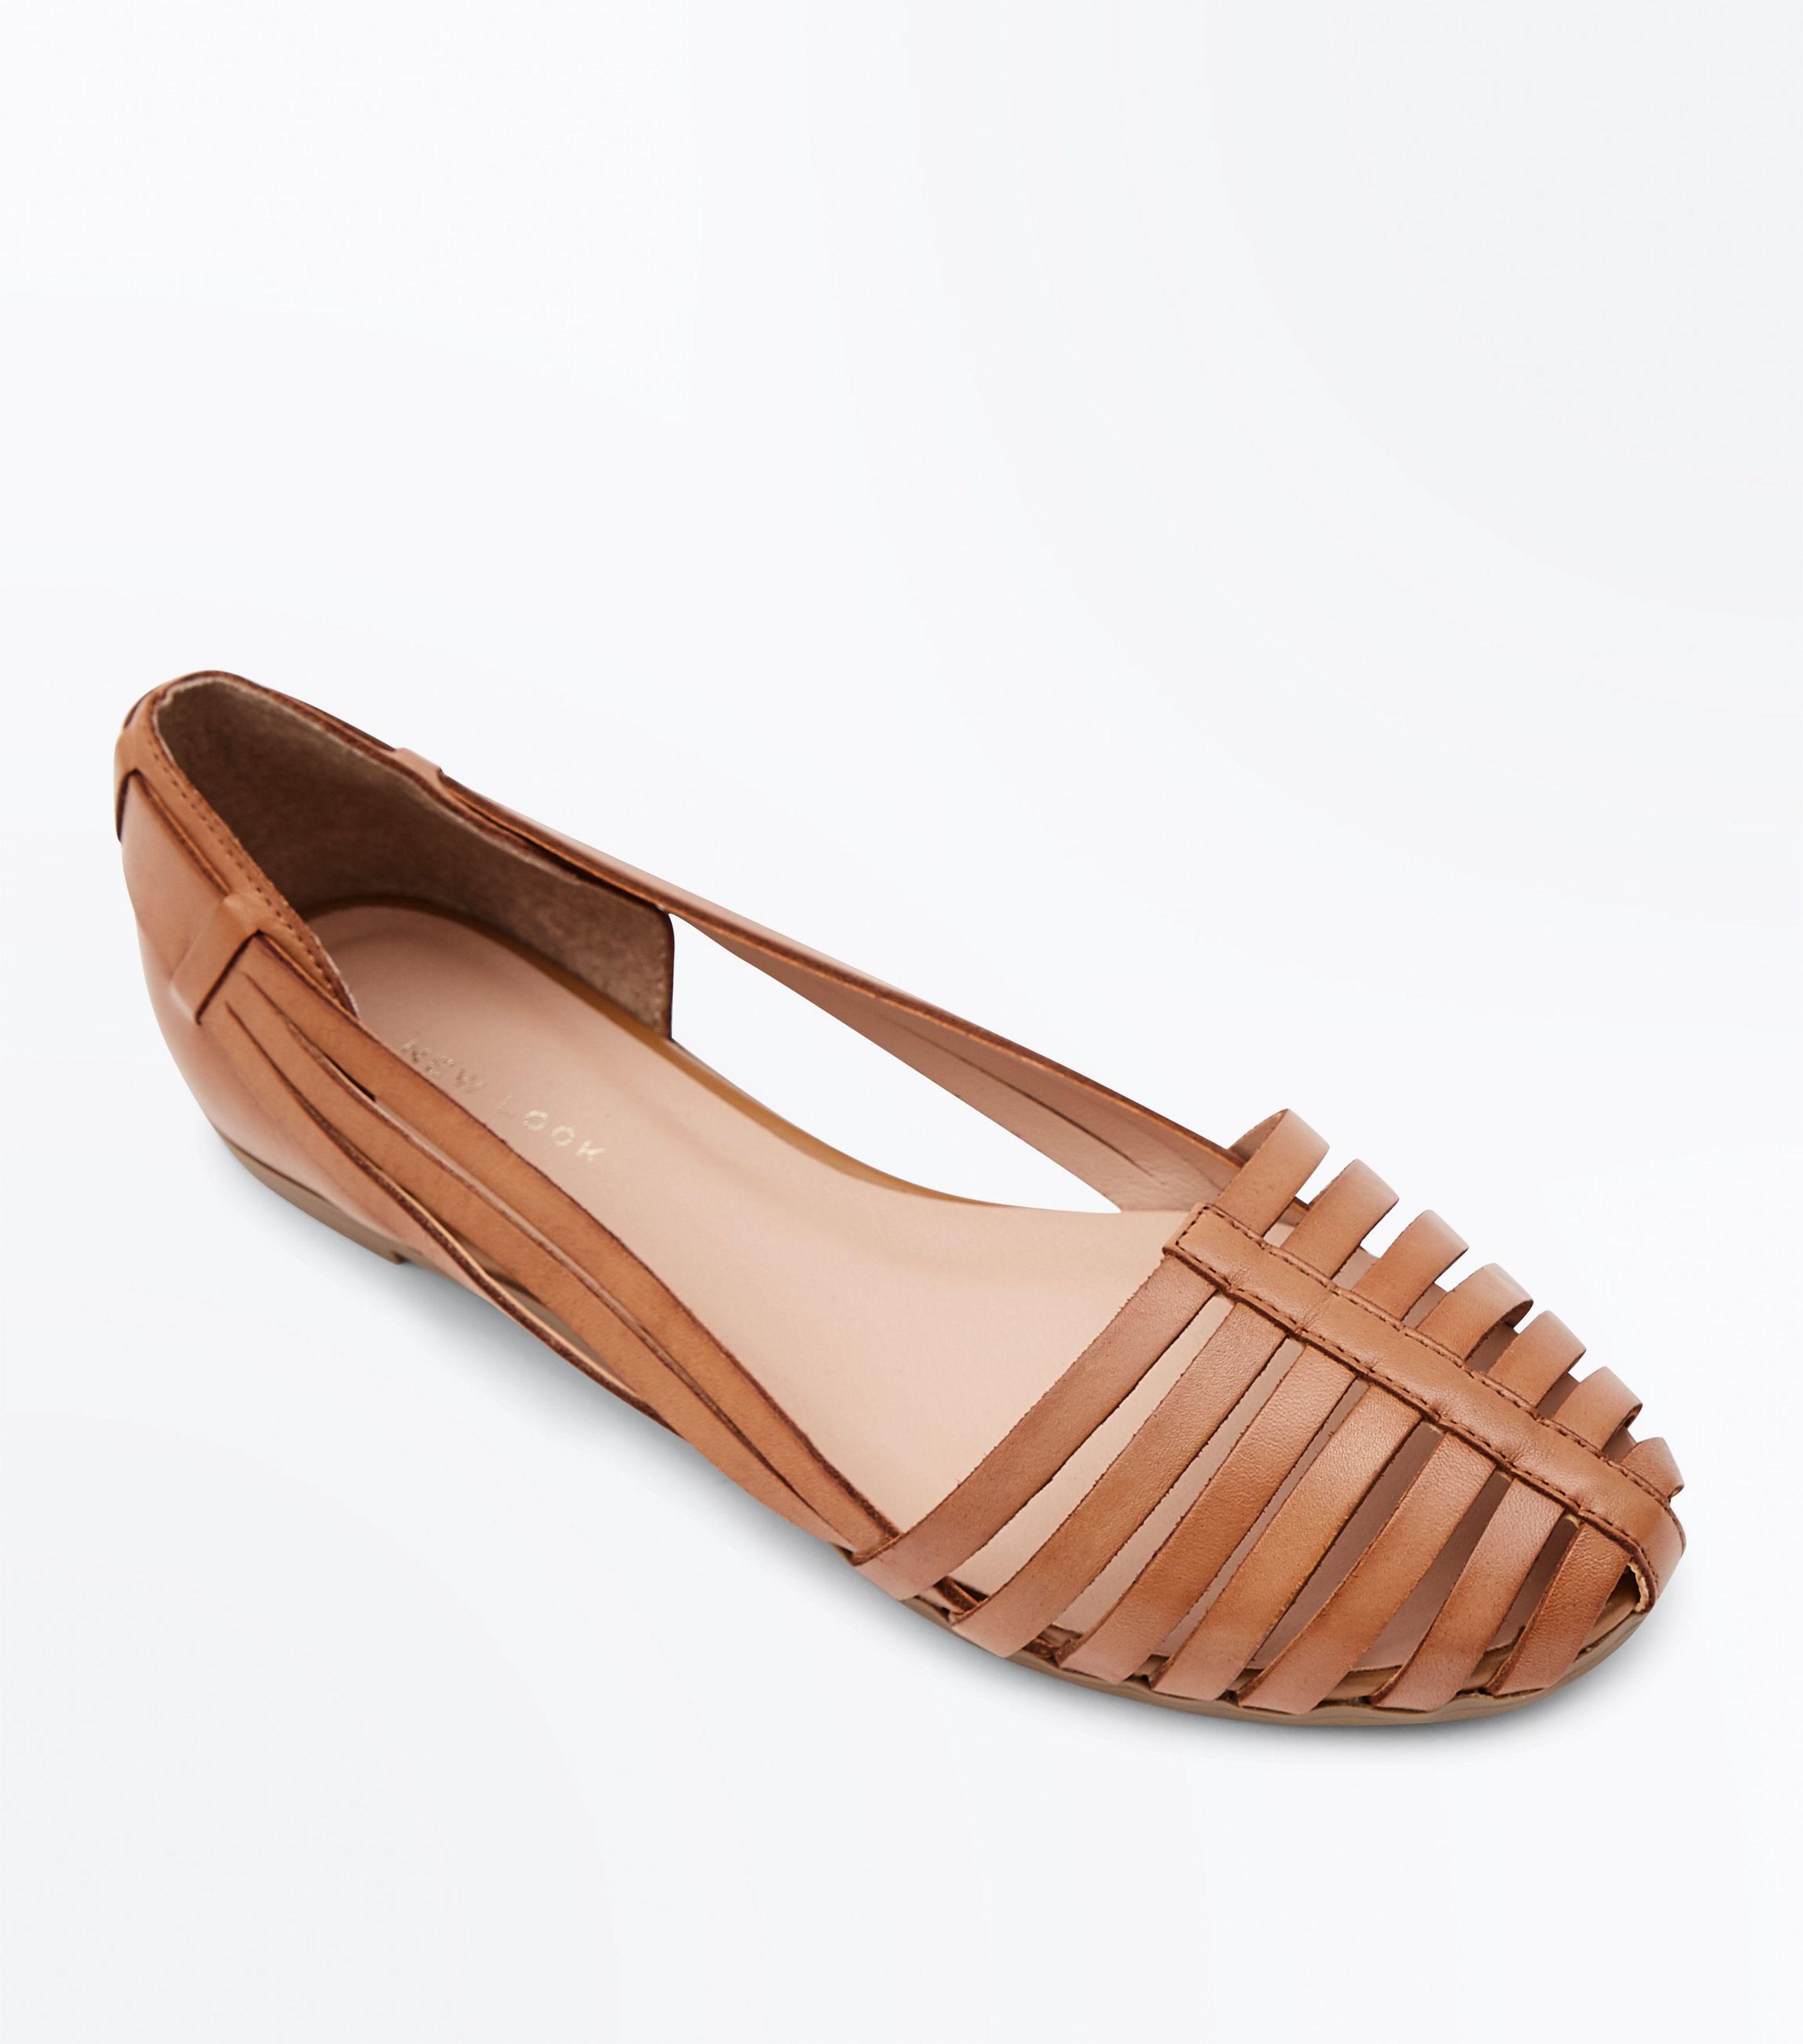 New Look Tan Leather Woven Caged Ballet Pumps in Brown - Lyst